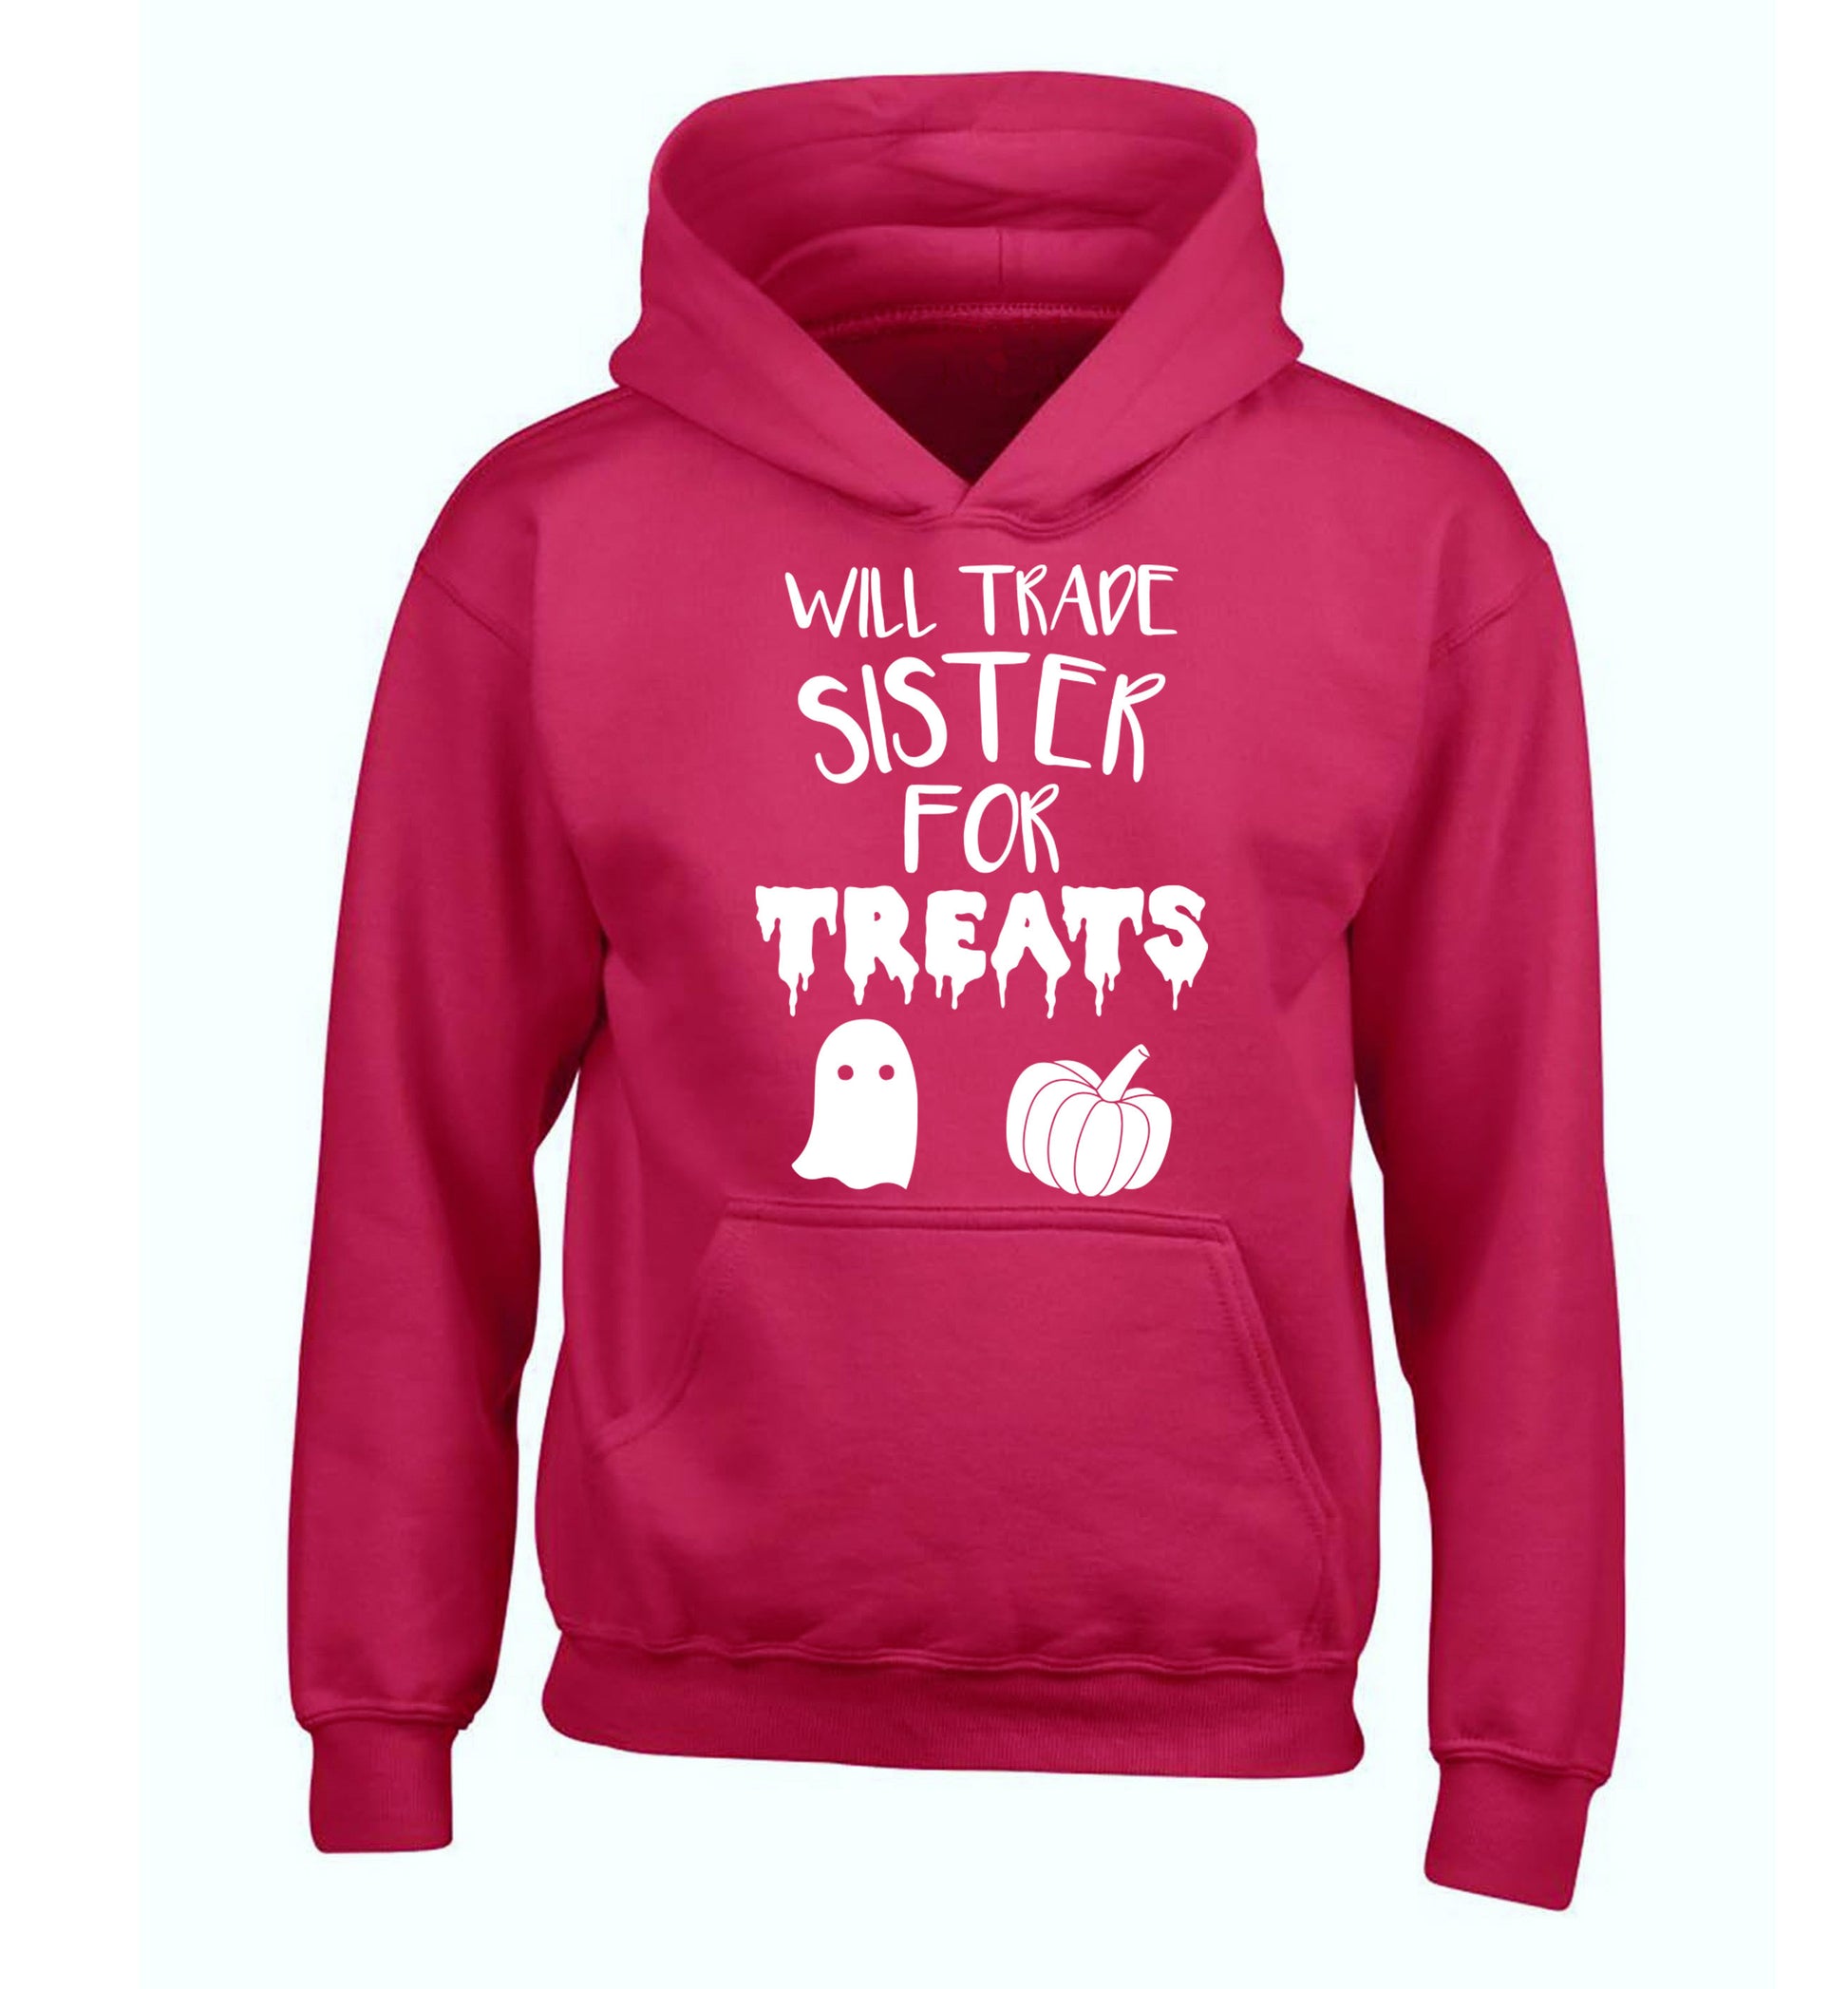 Will trade sister for treats children's pink hoodie 12-14 Years